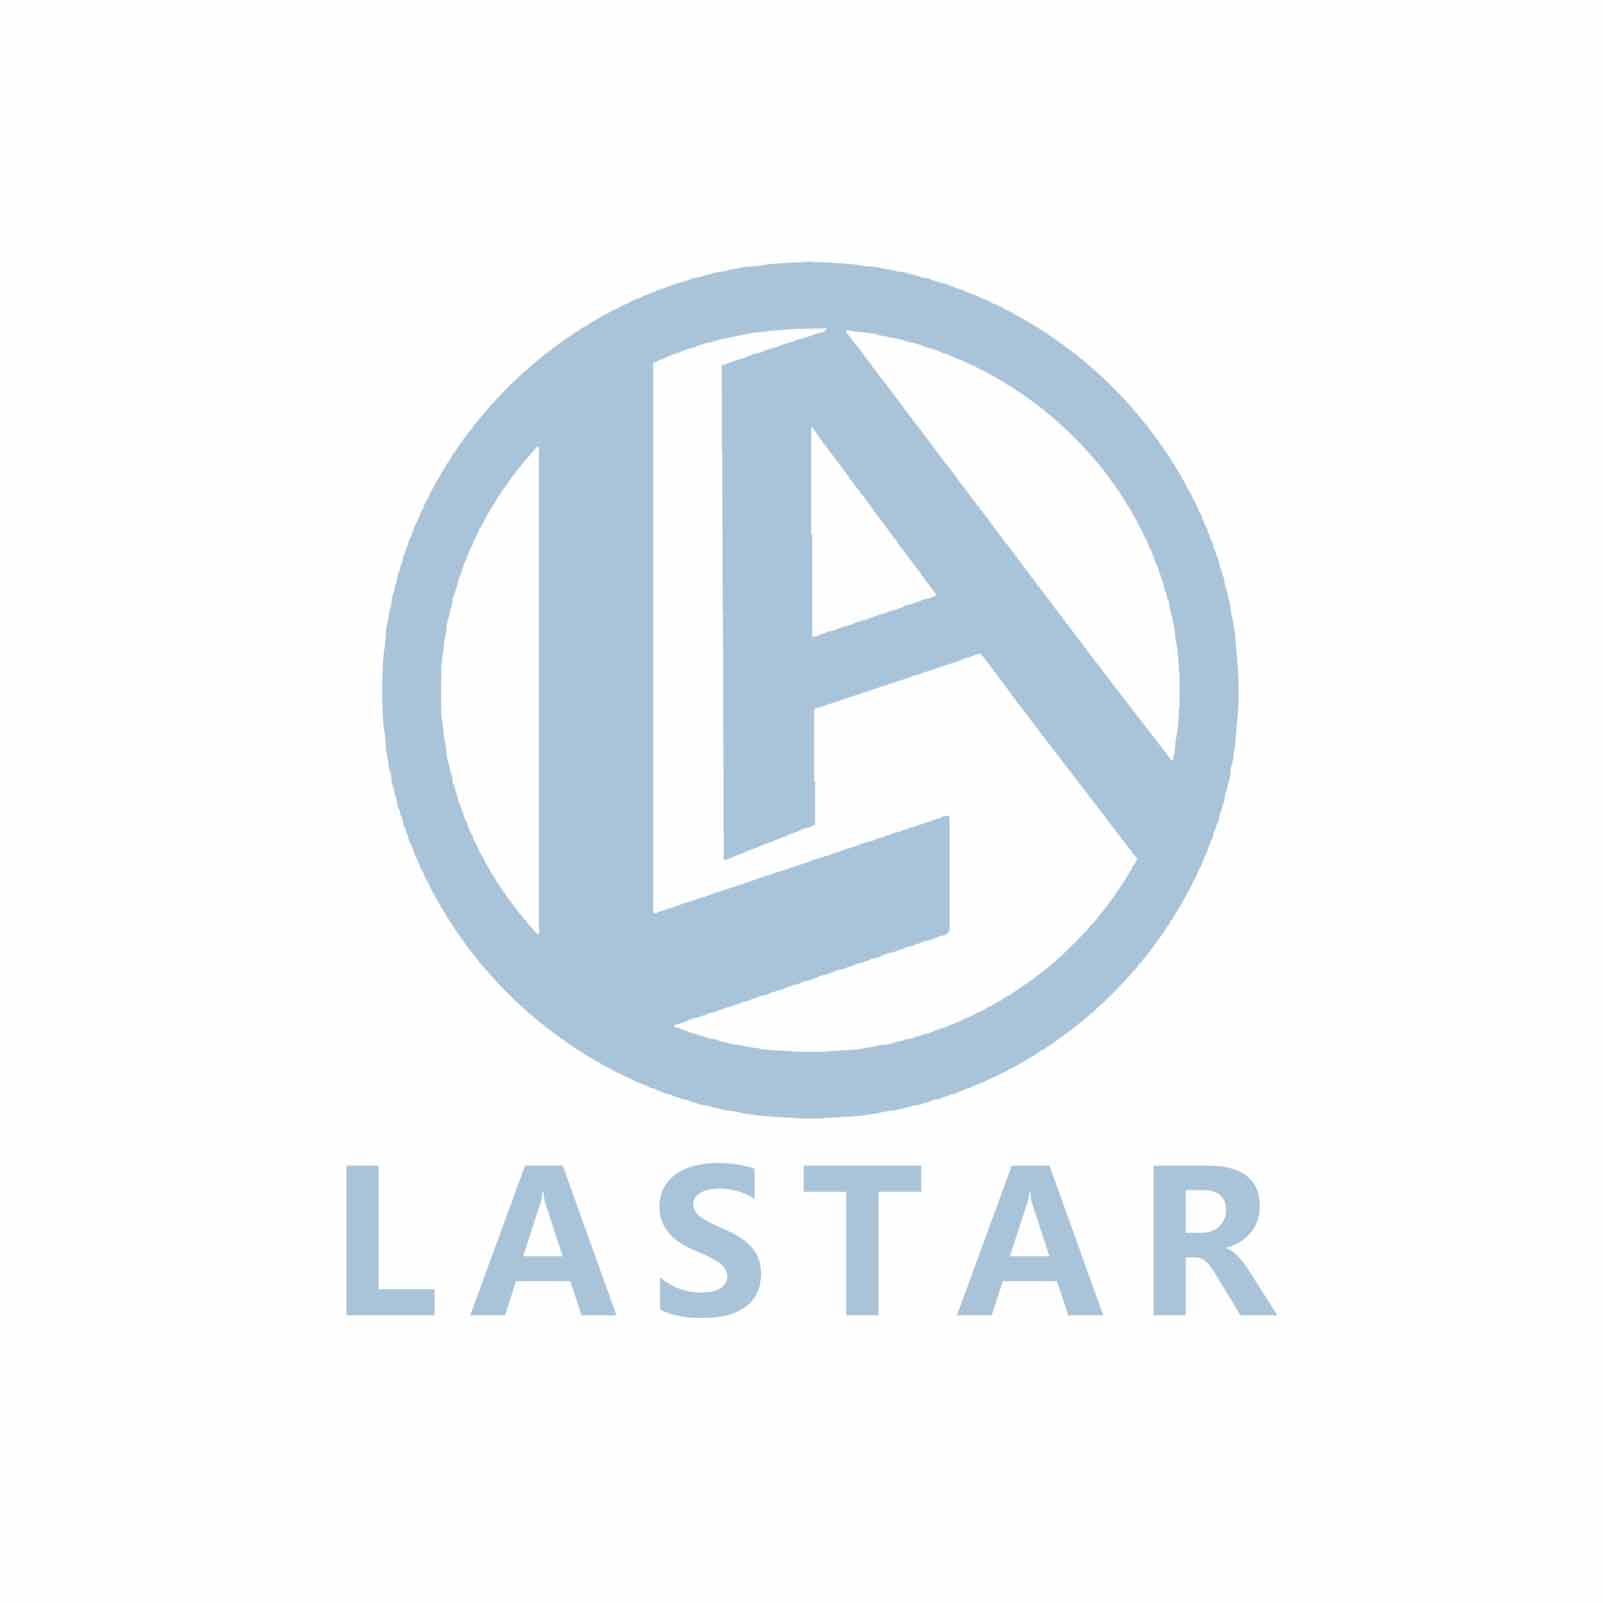 Body Lastar Spare Part | Truck Spare Parts, Auotomotive Spare Parts Body Lastar Spare Part | Truck Spare Parts, Auotomotive Spare Parts